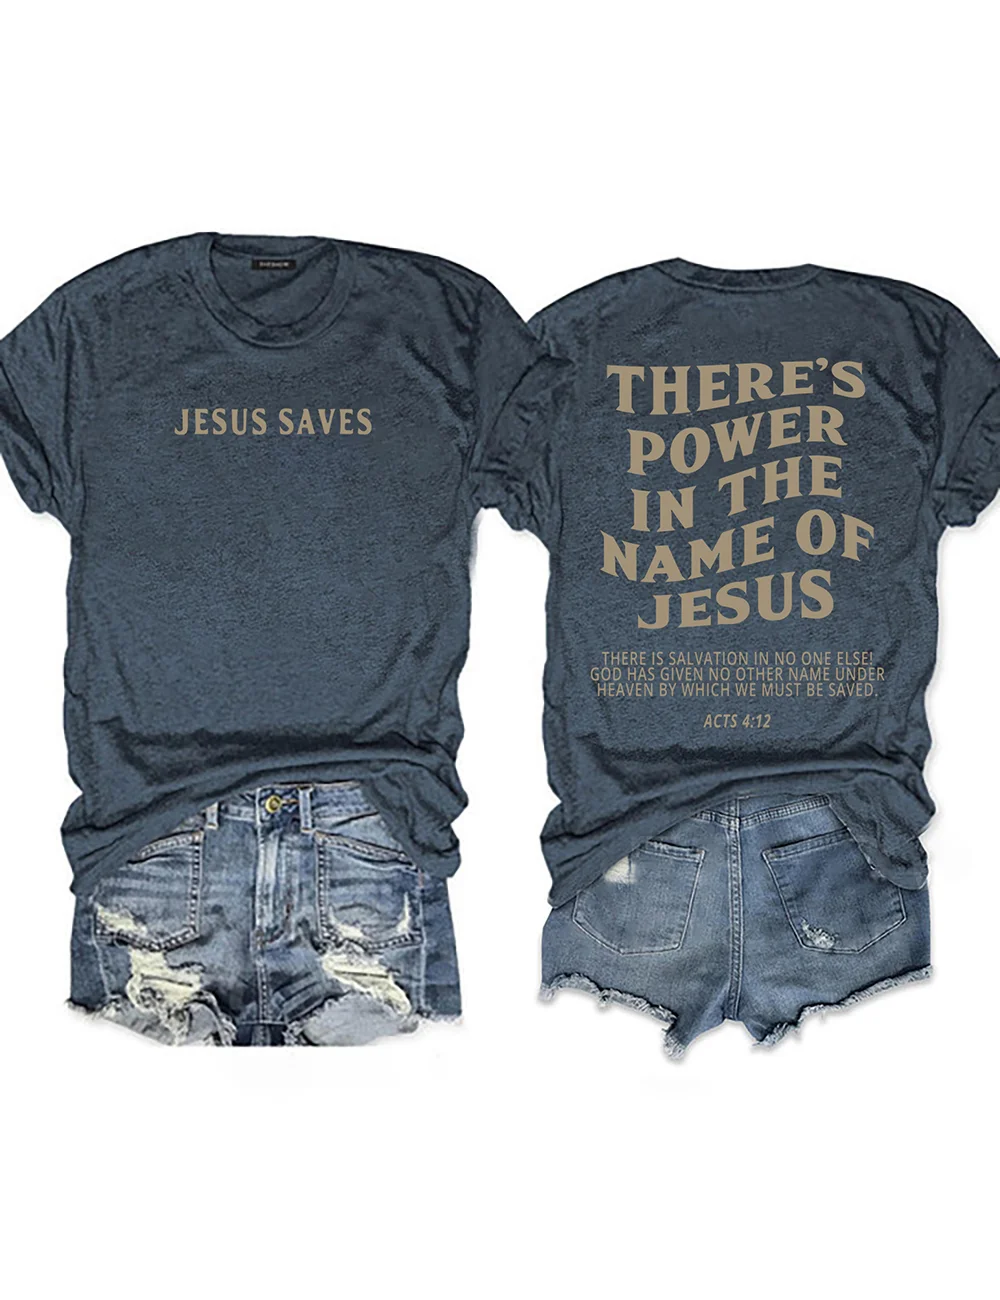 There‘s Power In The Name Of Jesus T-shirt